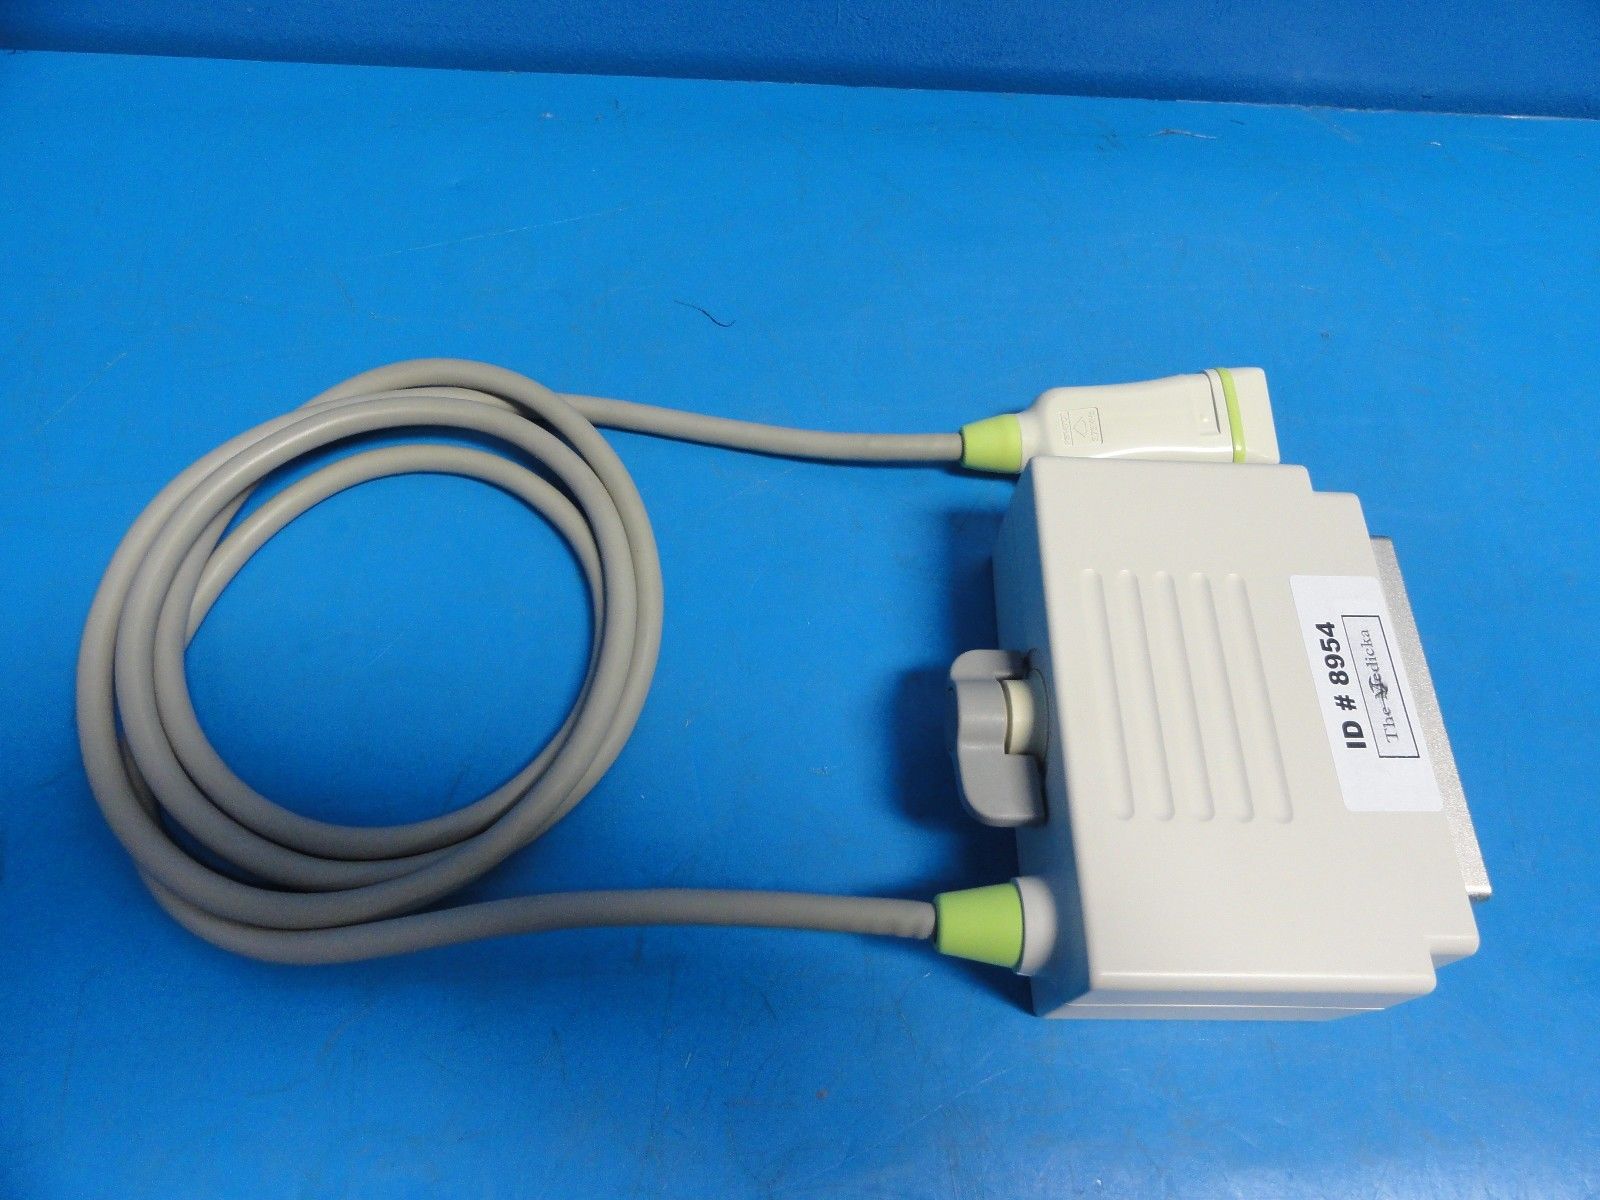 Toshiba PSK-37CT Linear Array Abdominal Sector Probe for PowerVision 7000 (8954) DIAGNOSTIC ULTRASOUND MACHINES FOR SALE